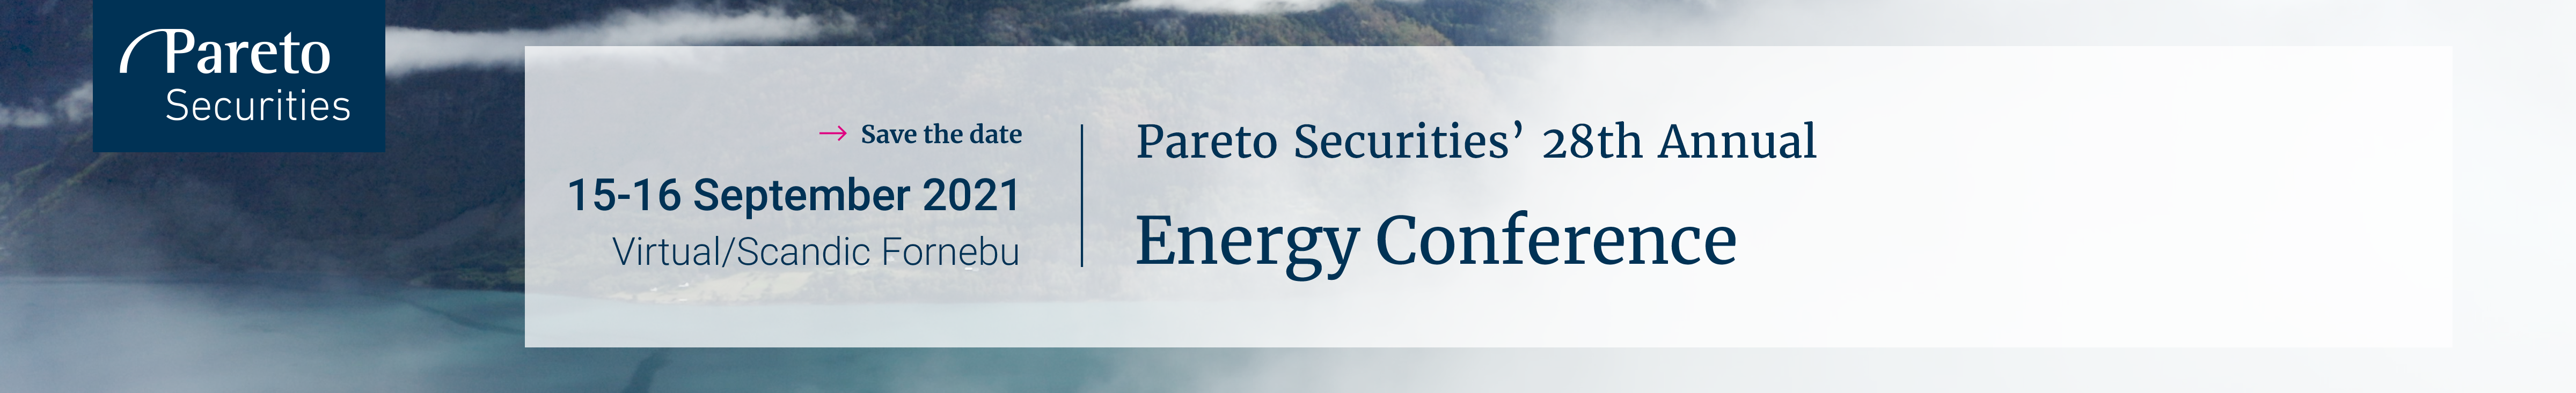 Header image for Pareto Securities’ 28th annual Energy Conference